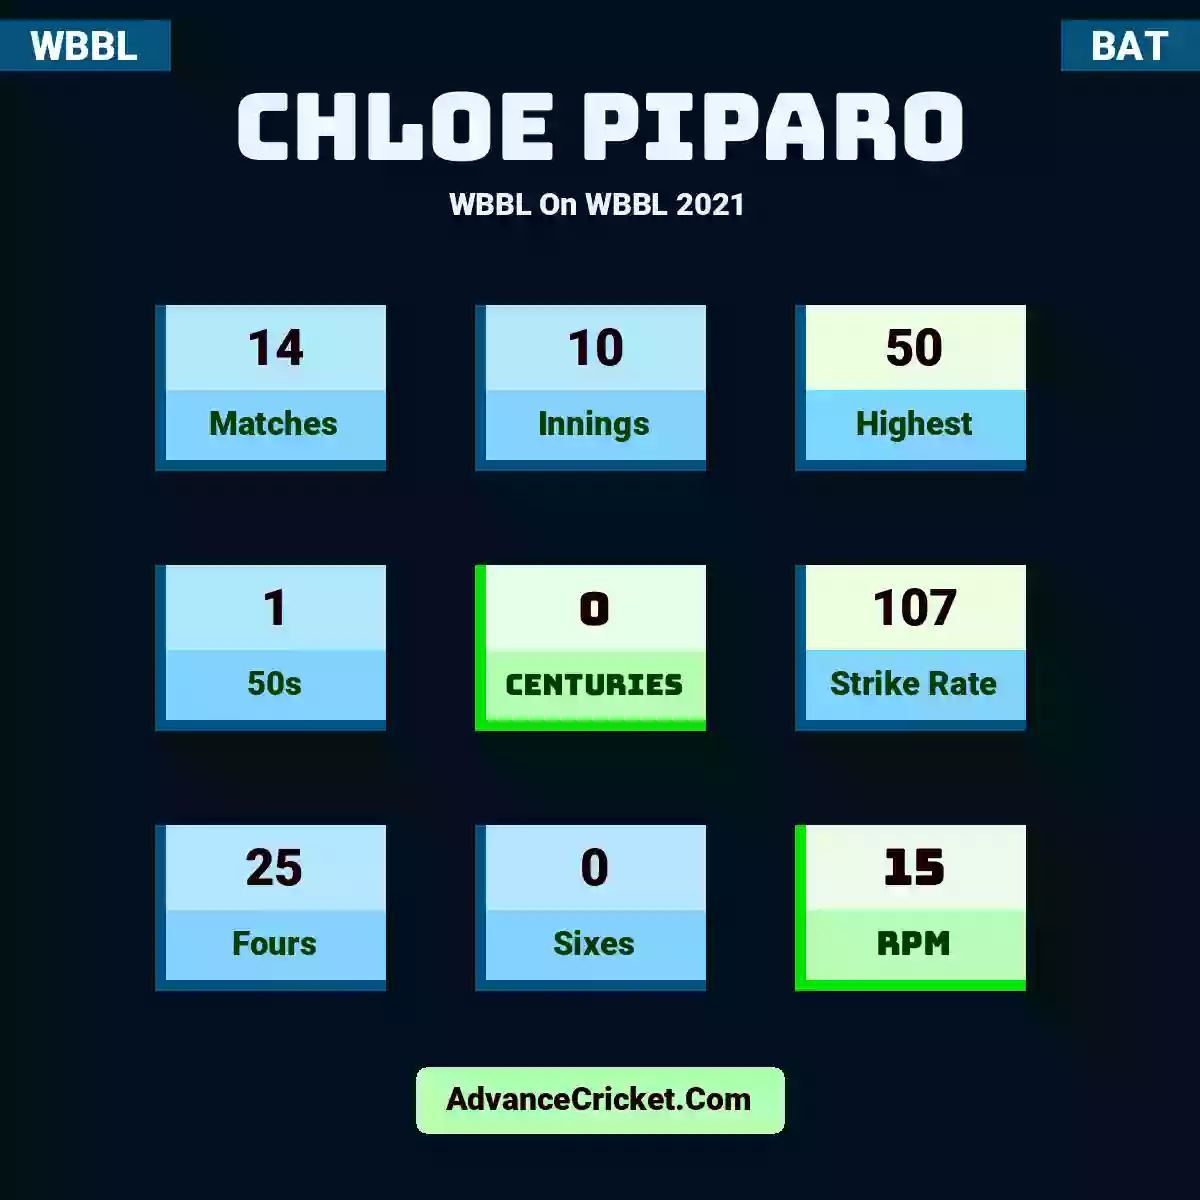 Chloe Piparo WBBL  On WBBL 2021, Chloe Piparo played 14 matches, scored 50 runs as highest, 1 half-centuries, and 0 centuries, with a strike rate of 107. C.Piparo hit 25 fours and 0 sixes, with an RPM of 15.